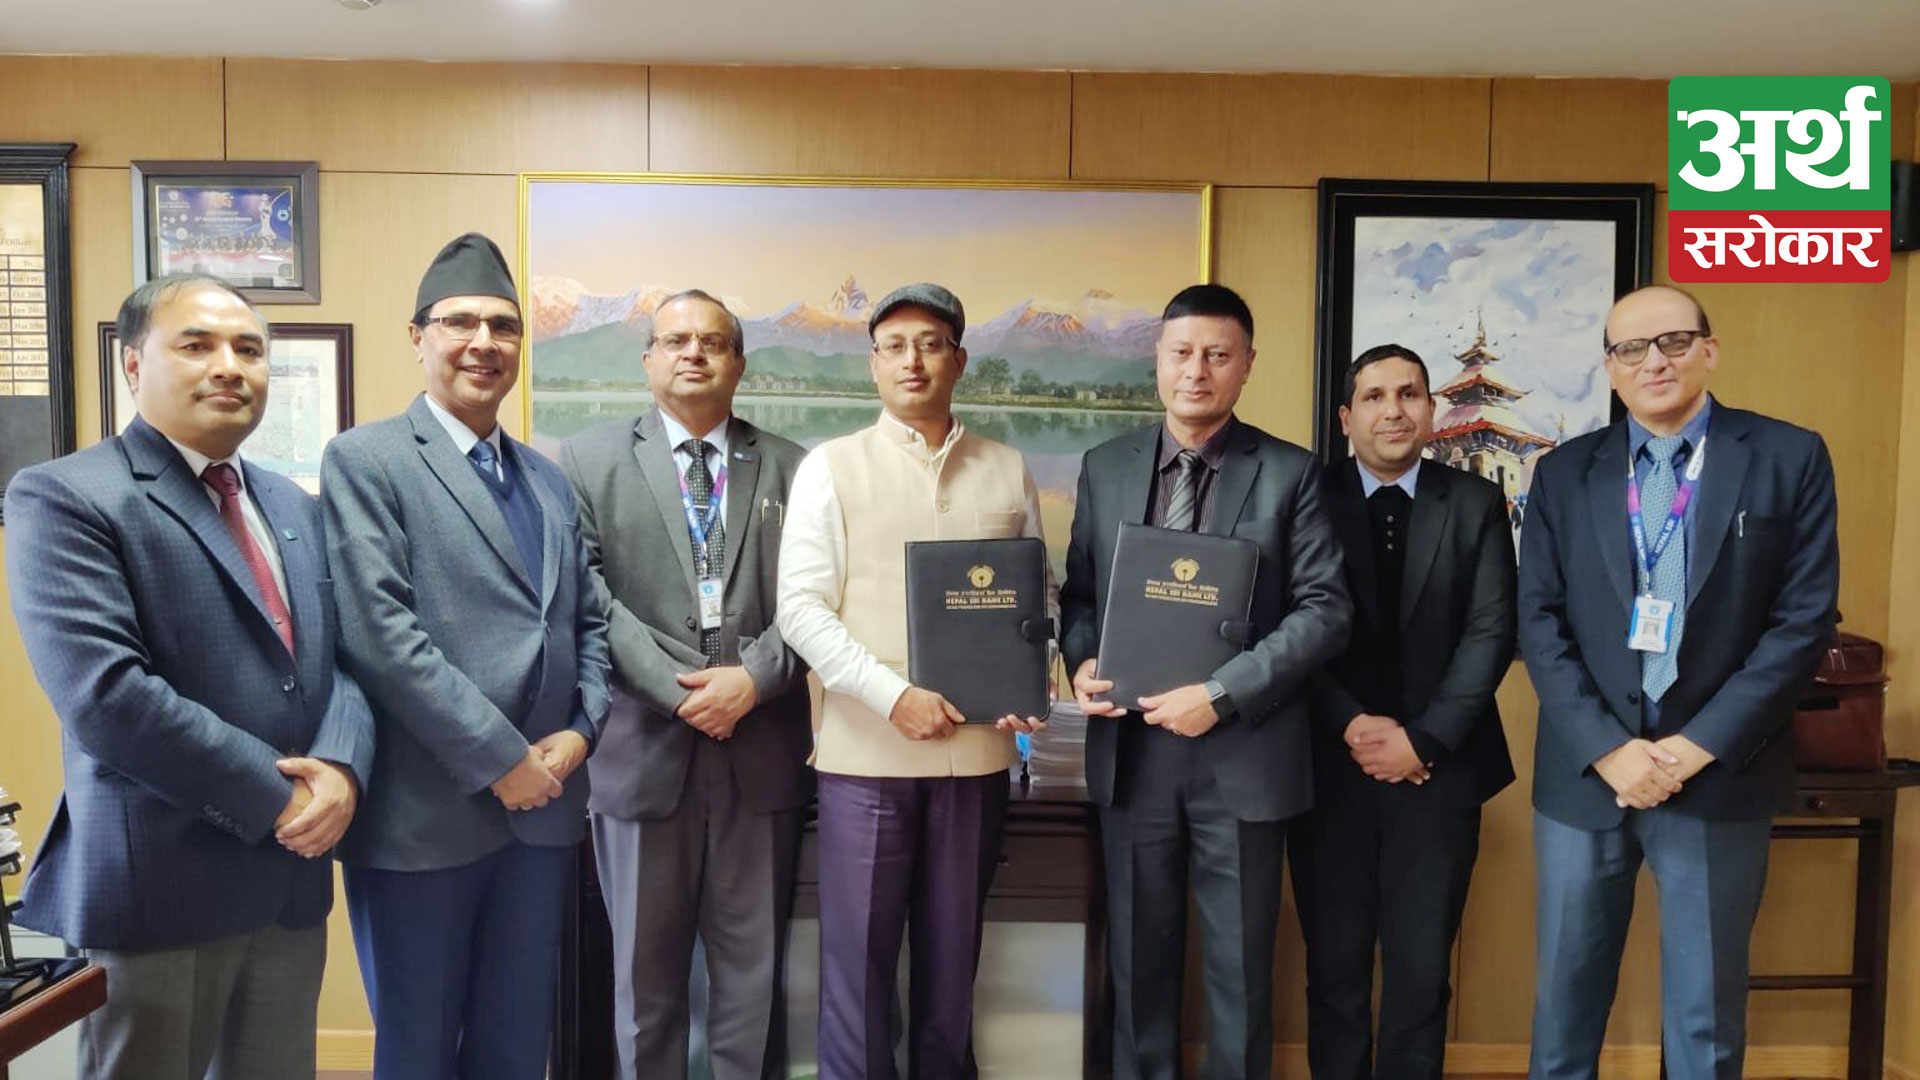 Nepal SBI Bank Ltd. enters into an agreement with Progressive Finance Limited